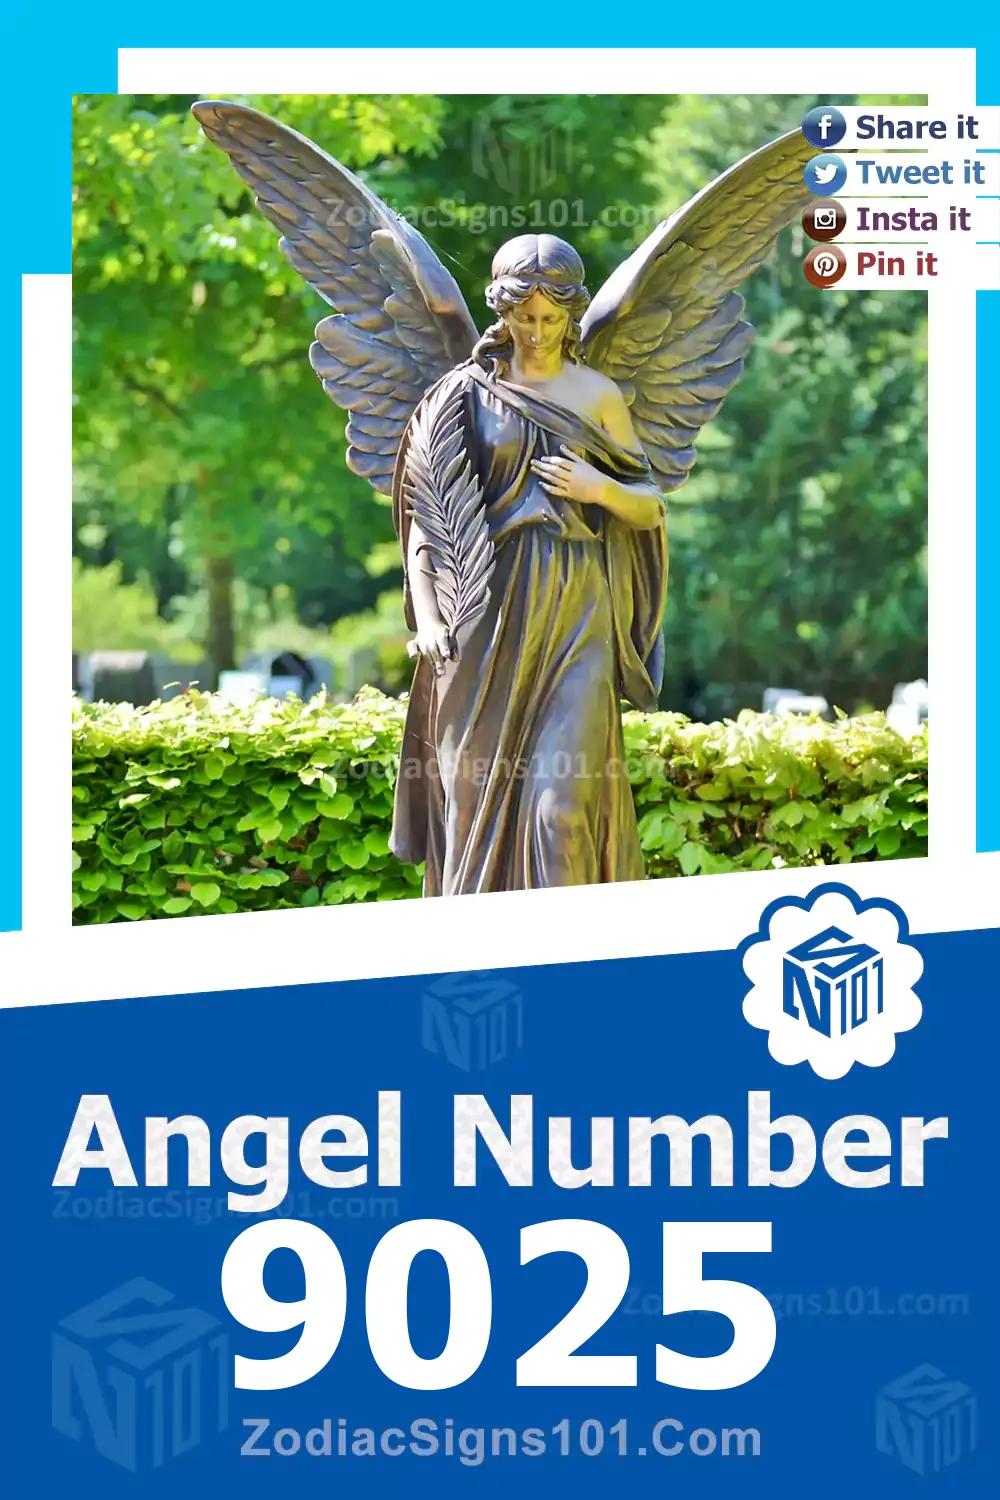 9025 Angel Number Meaning